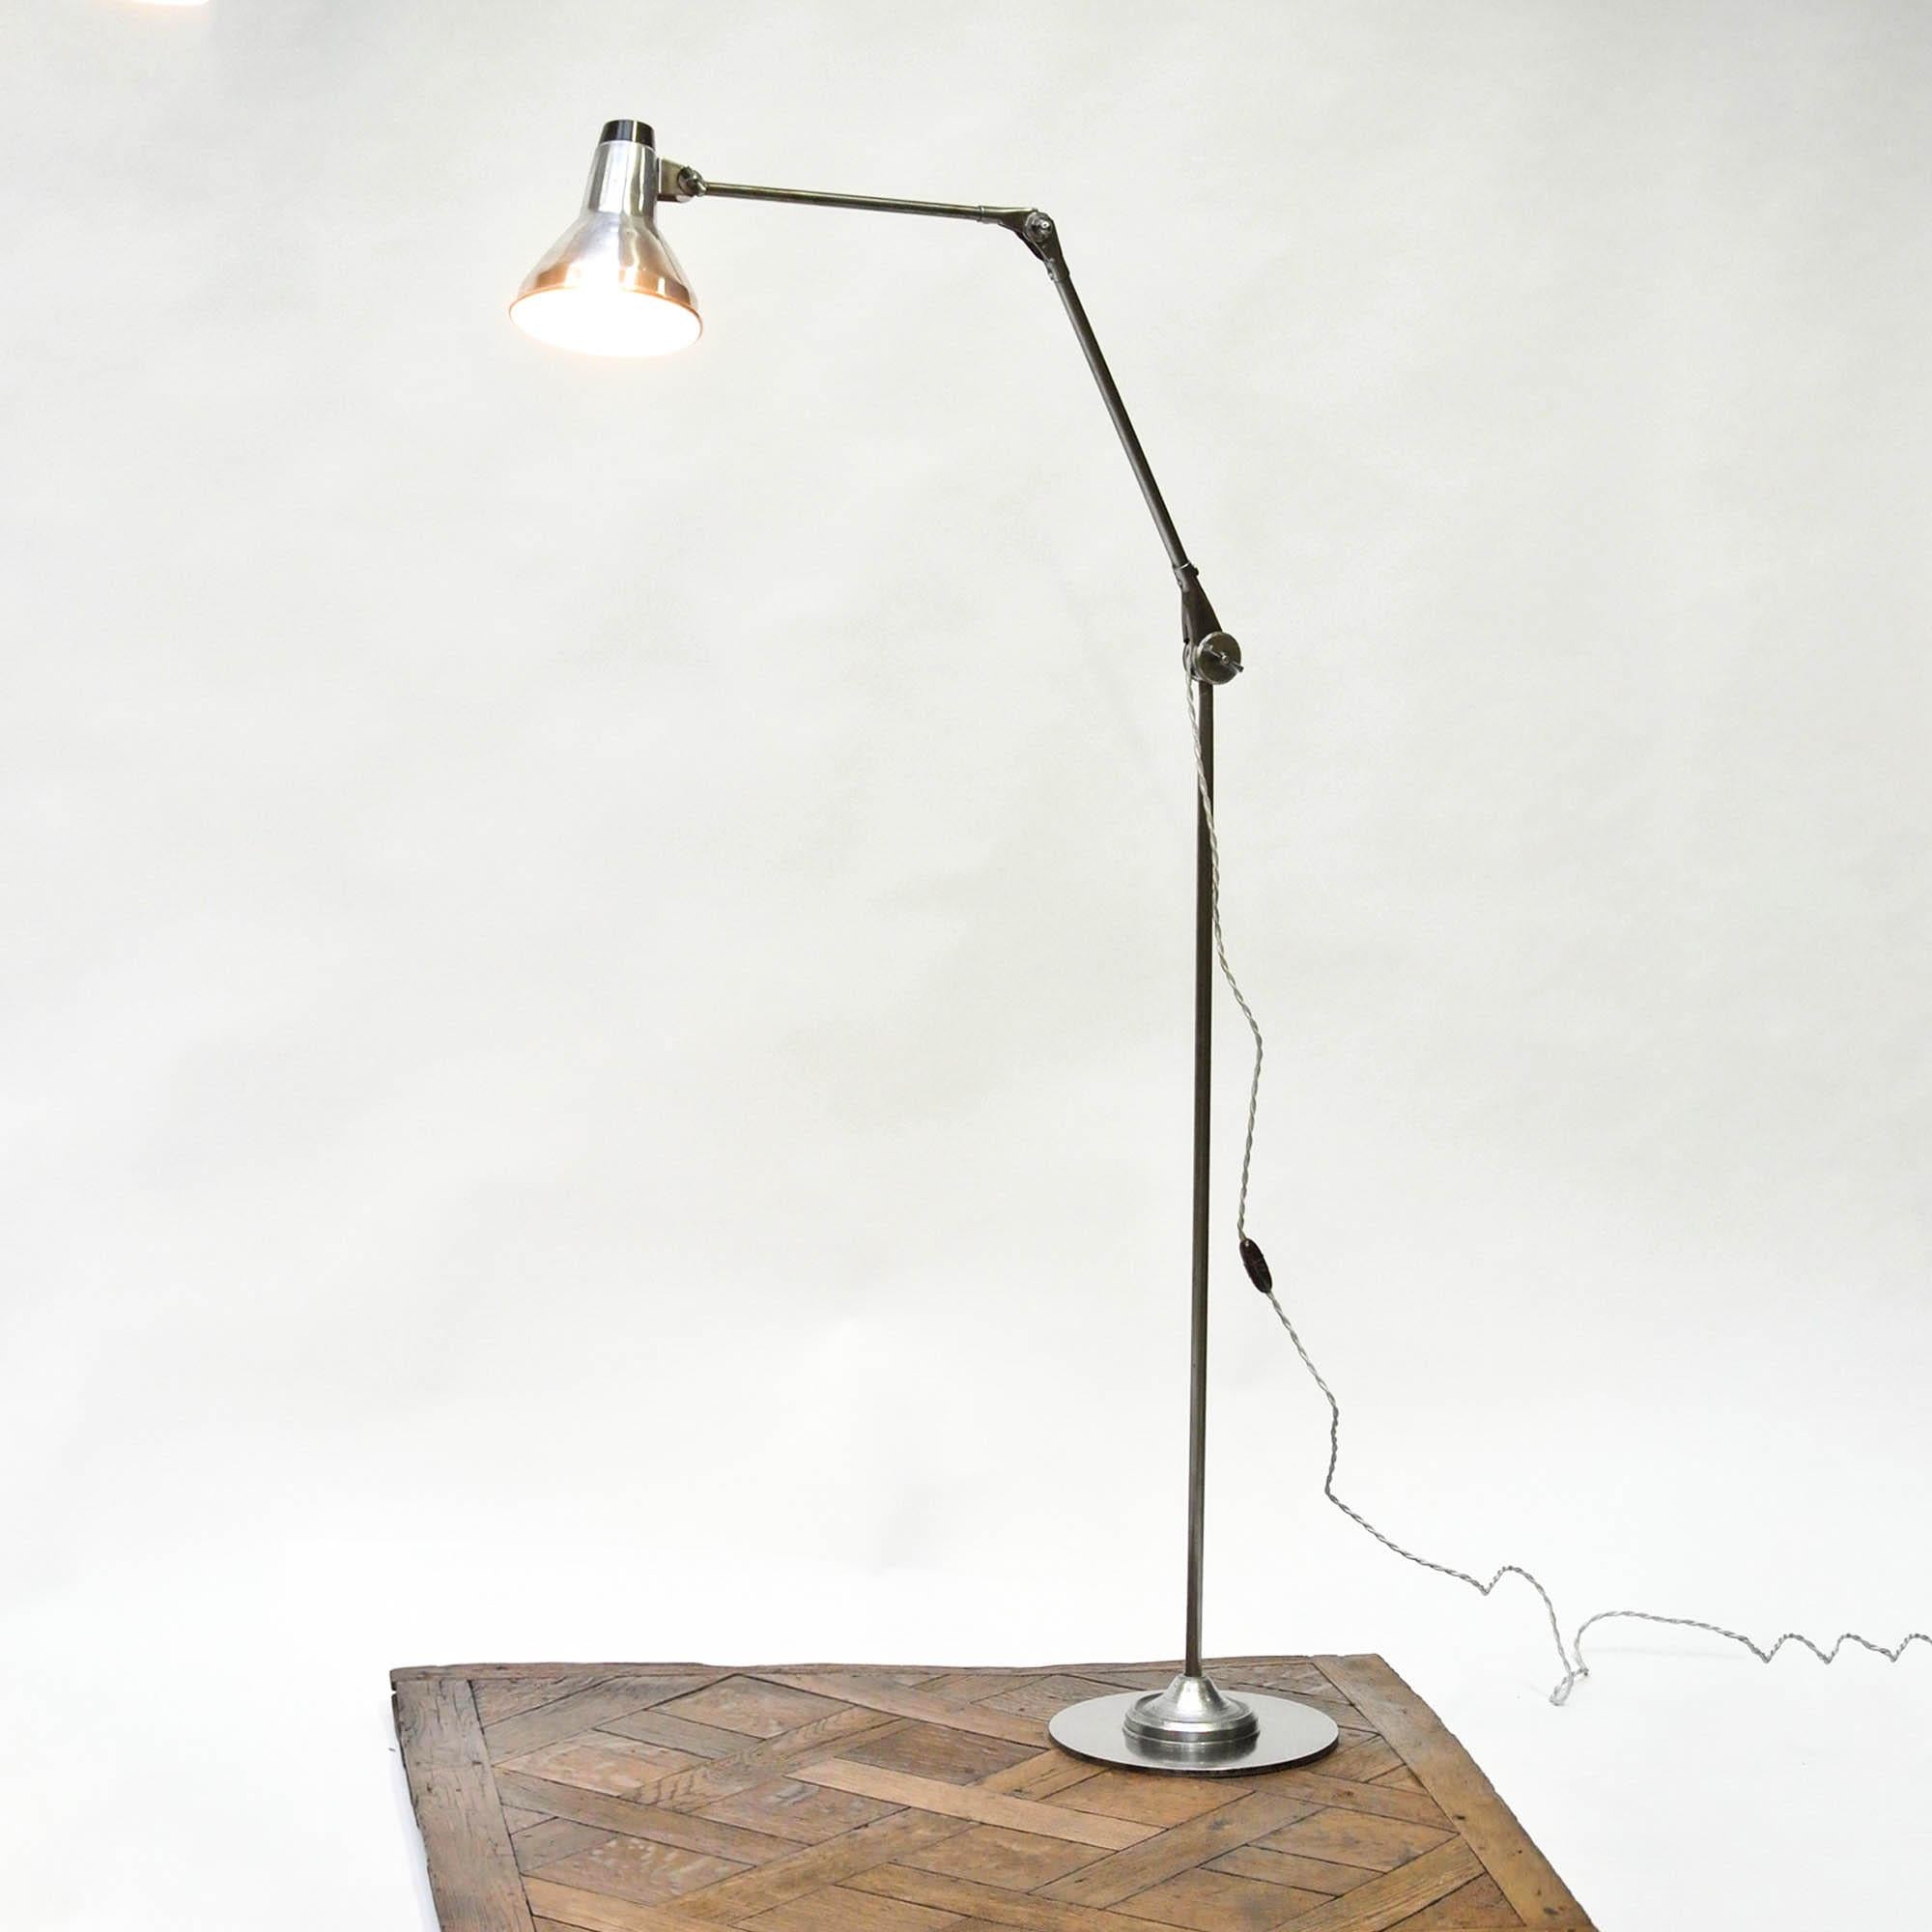 Vintage floor lamp originally used in a workshop of architect. We have based the lamp, which was directly fixed on the floor at that time. The lamp is articulated on the lampshade and arms thanks to an adjustable inclination bracket system. Original